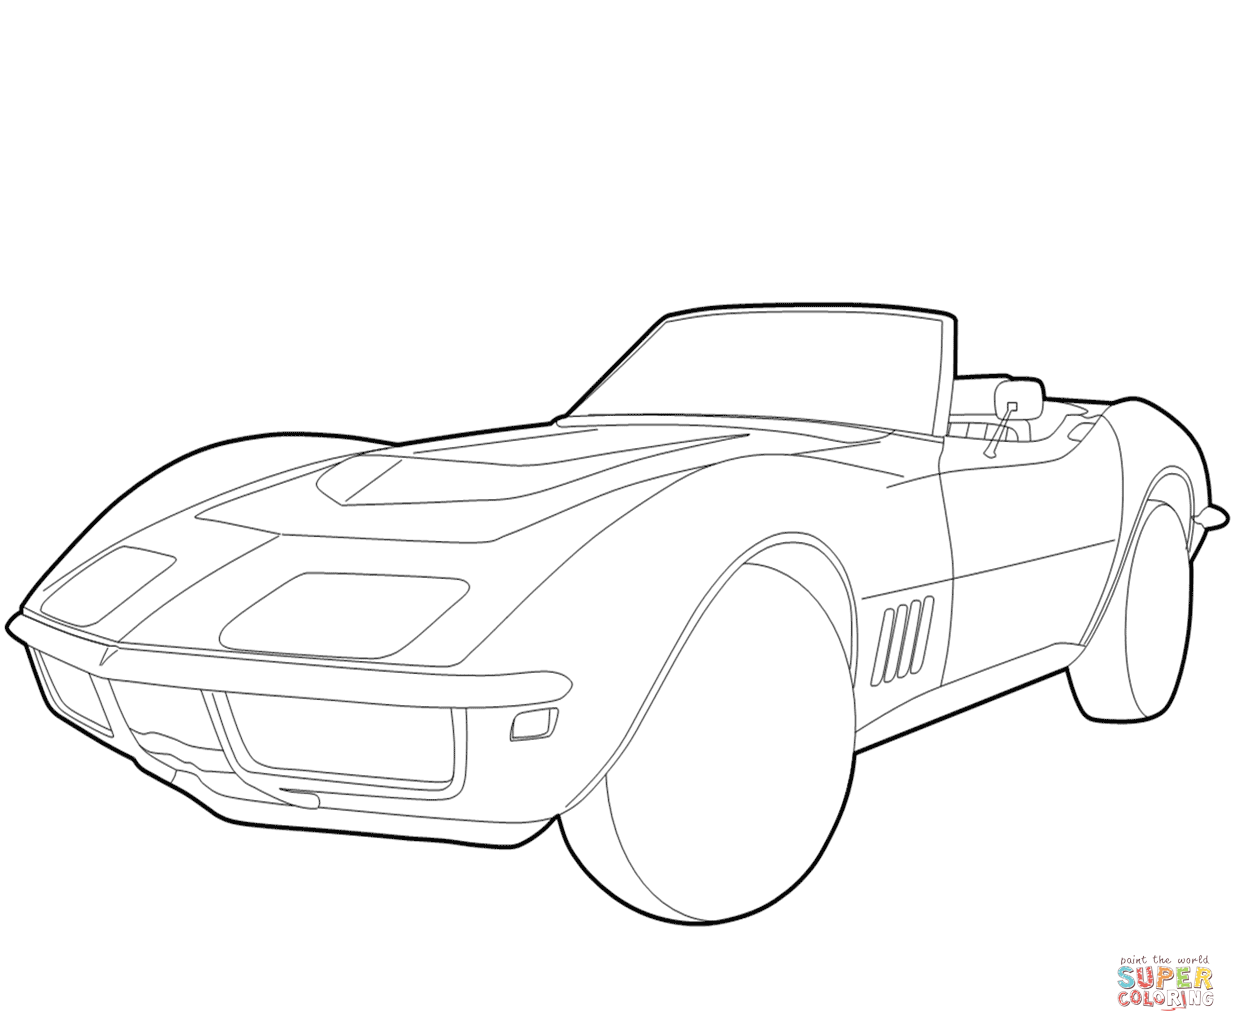  Cute Corvette Drawings Sketches with simple drawing